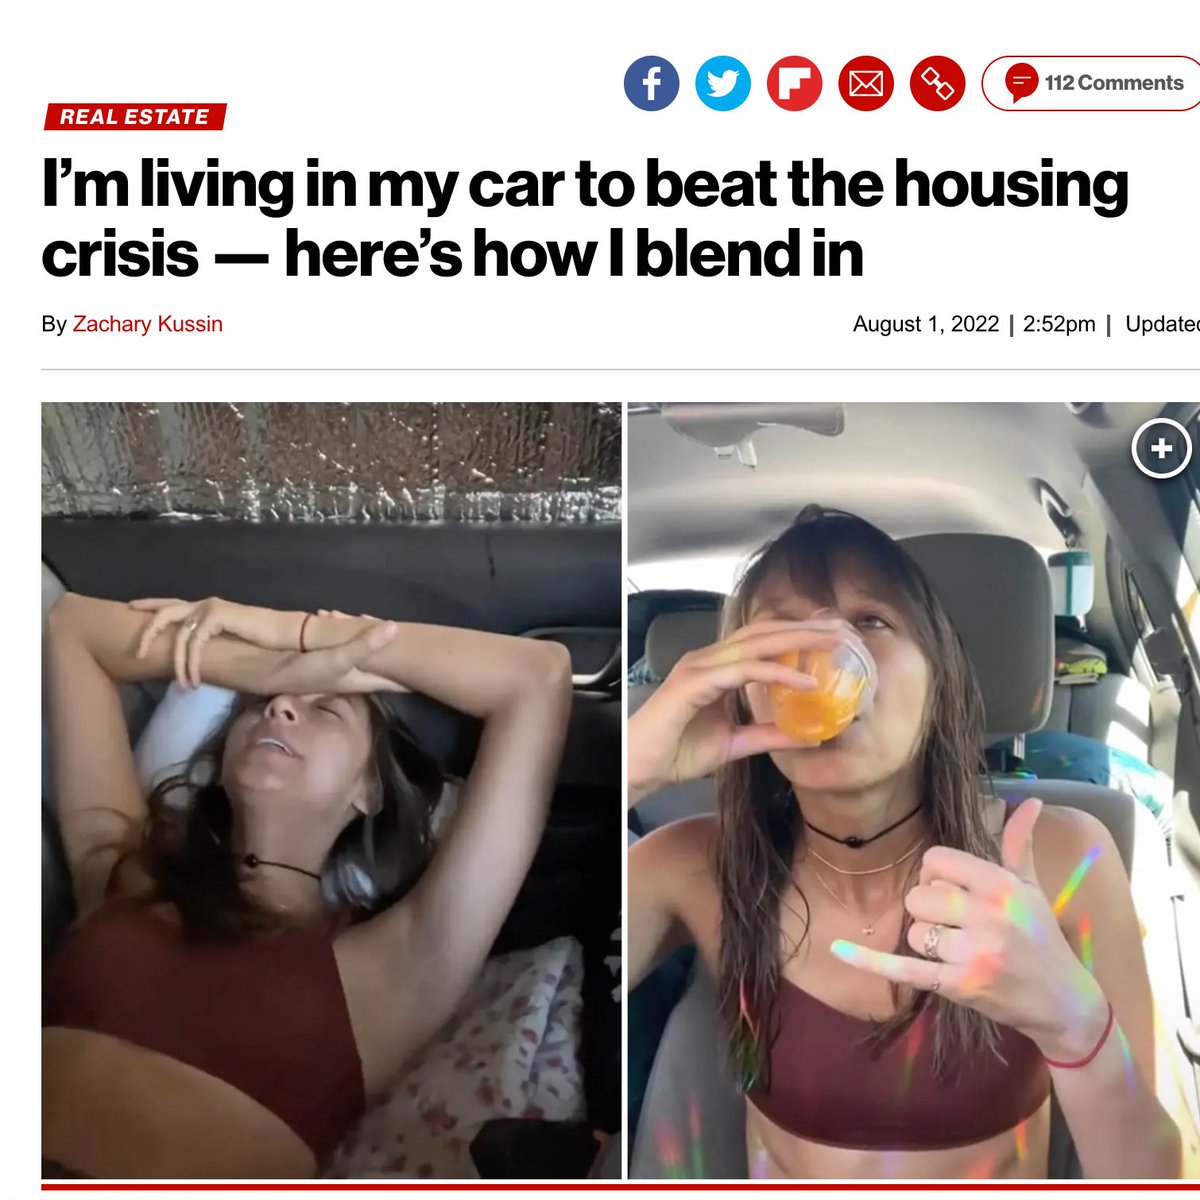 Living in your car is not 'beating' the housing crisis, it's the housing crisis beating you.